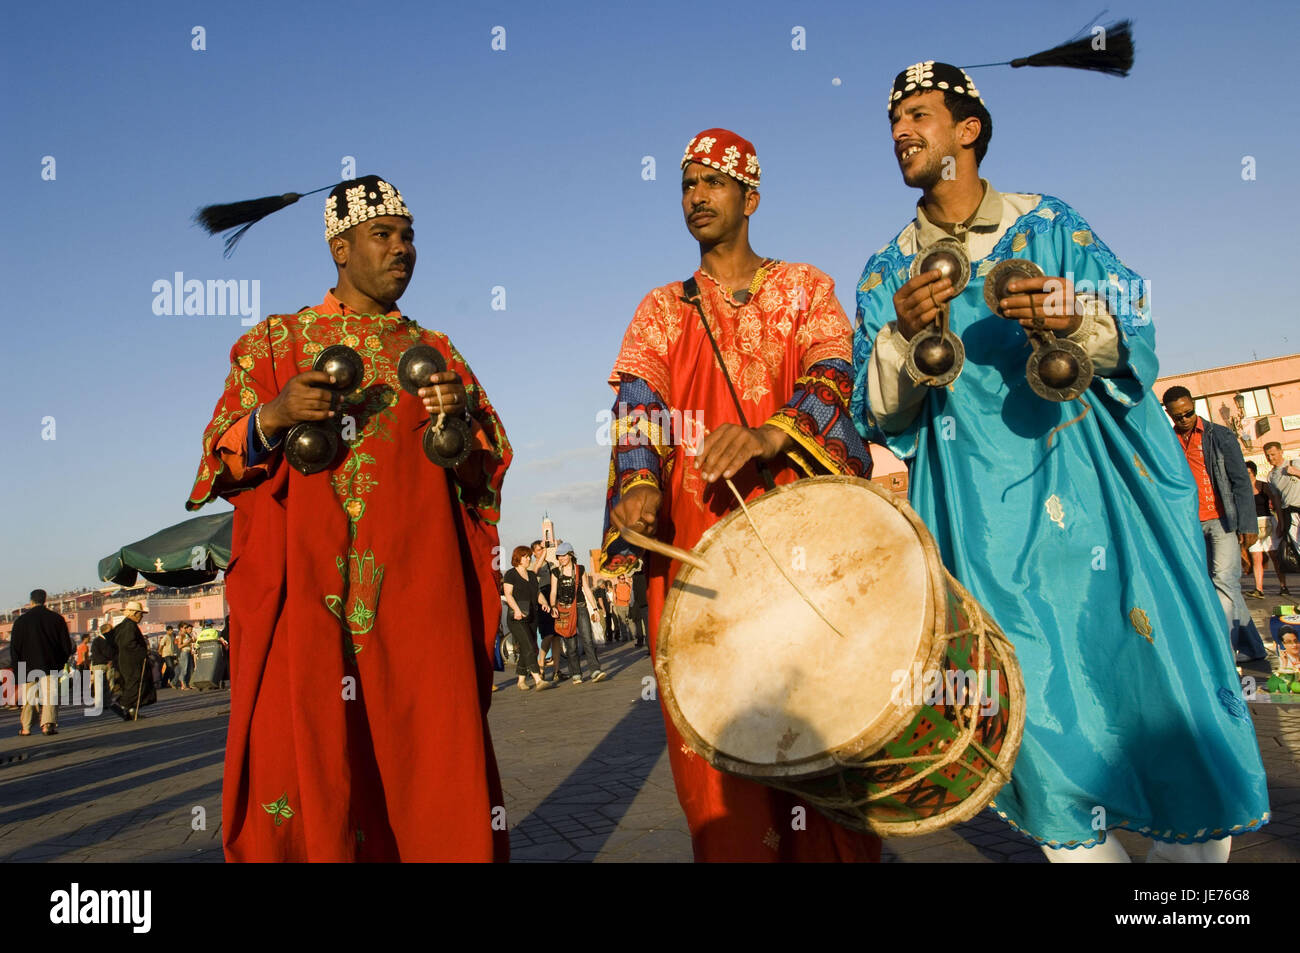 Morocco, Marrakech, space Jemaa-El-Fna, musician, three, no model release, Africa, North Africa, place of interest, culture, person, locals, Moroccans, clothes, traditionally, headgear, tassels, musical instruments, cymbals, drum, music, make music, Stock Photo